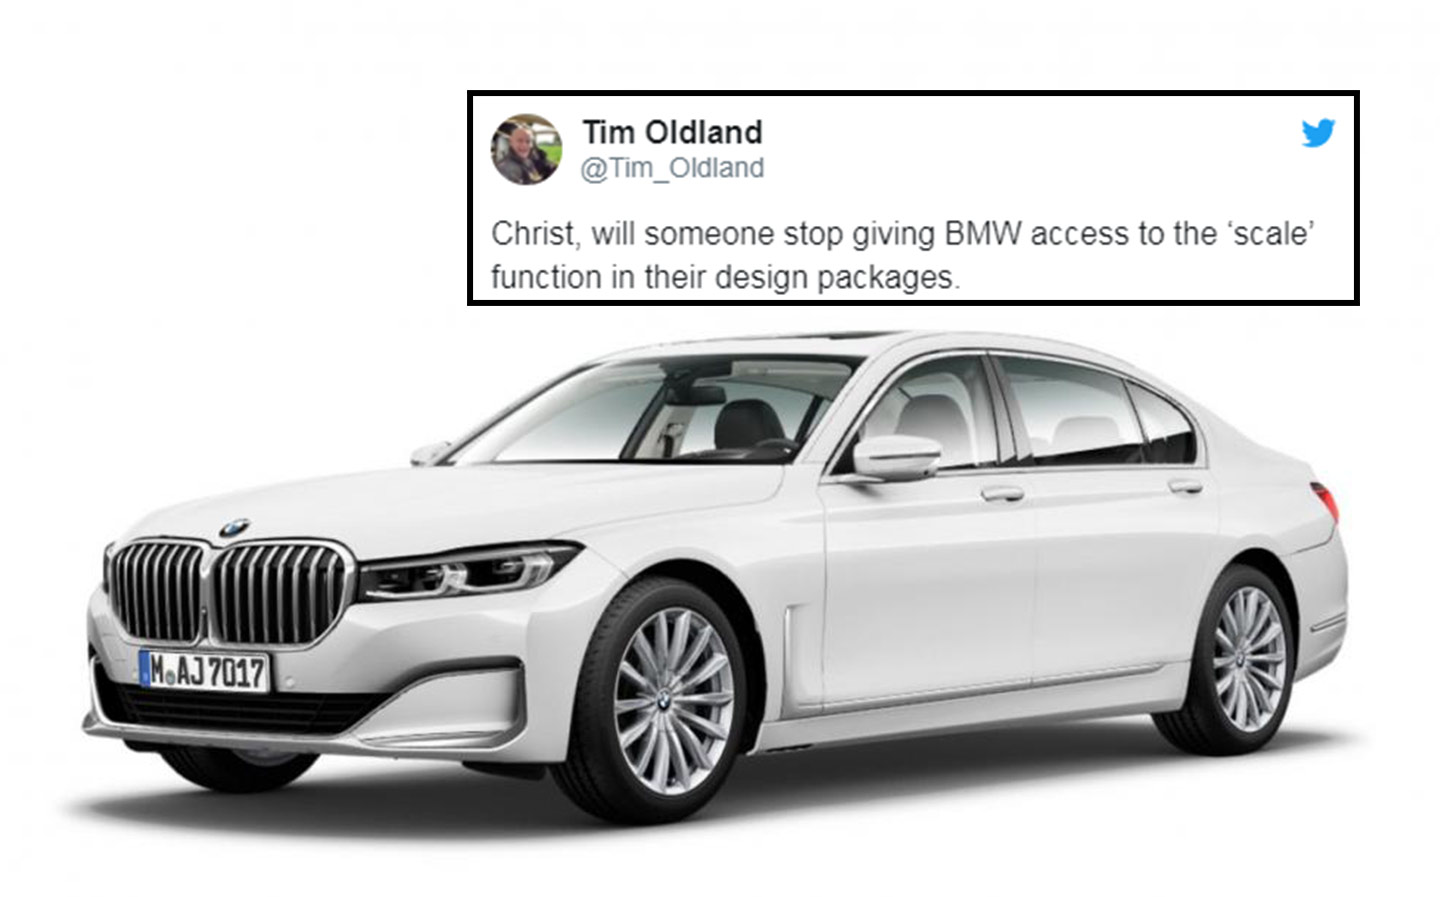 2020 BMW 7-series epic grille reactions on Twitter